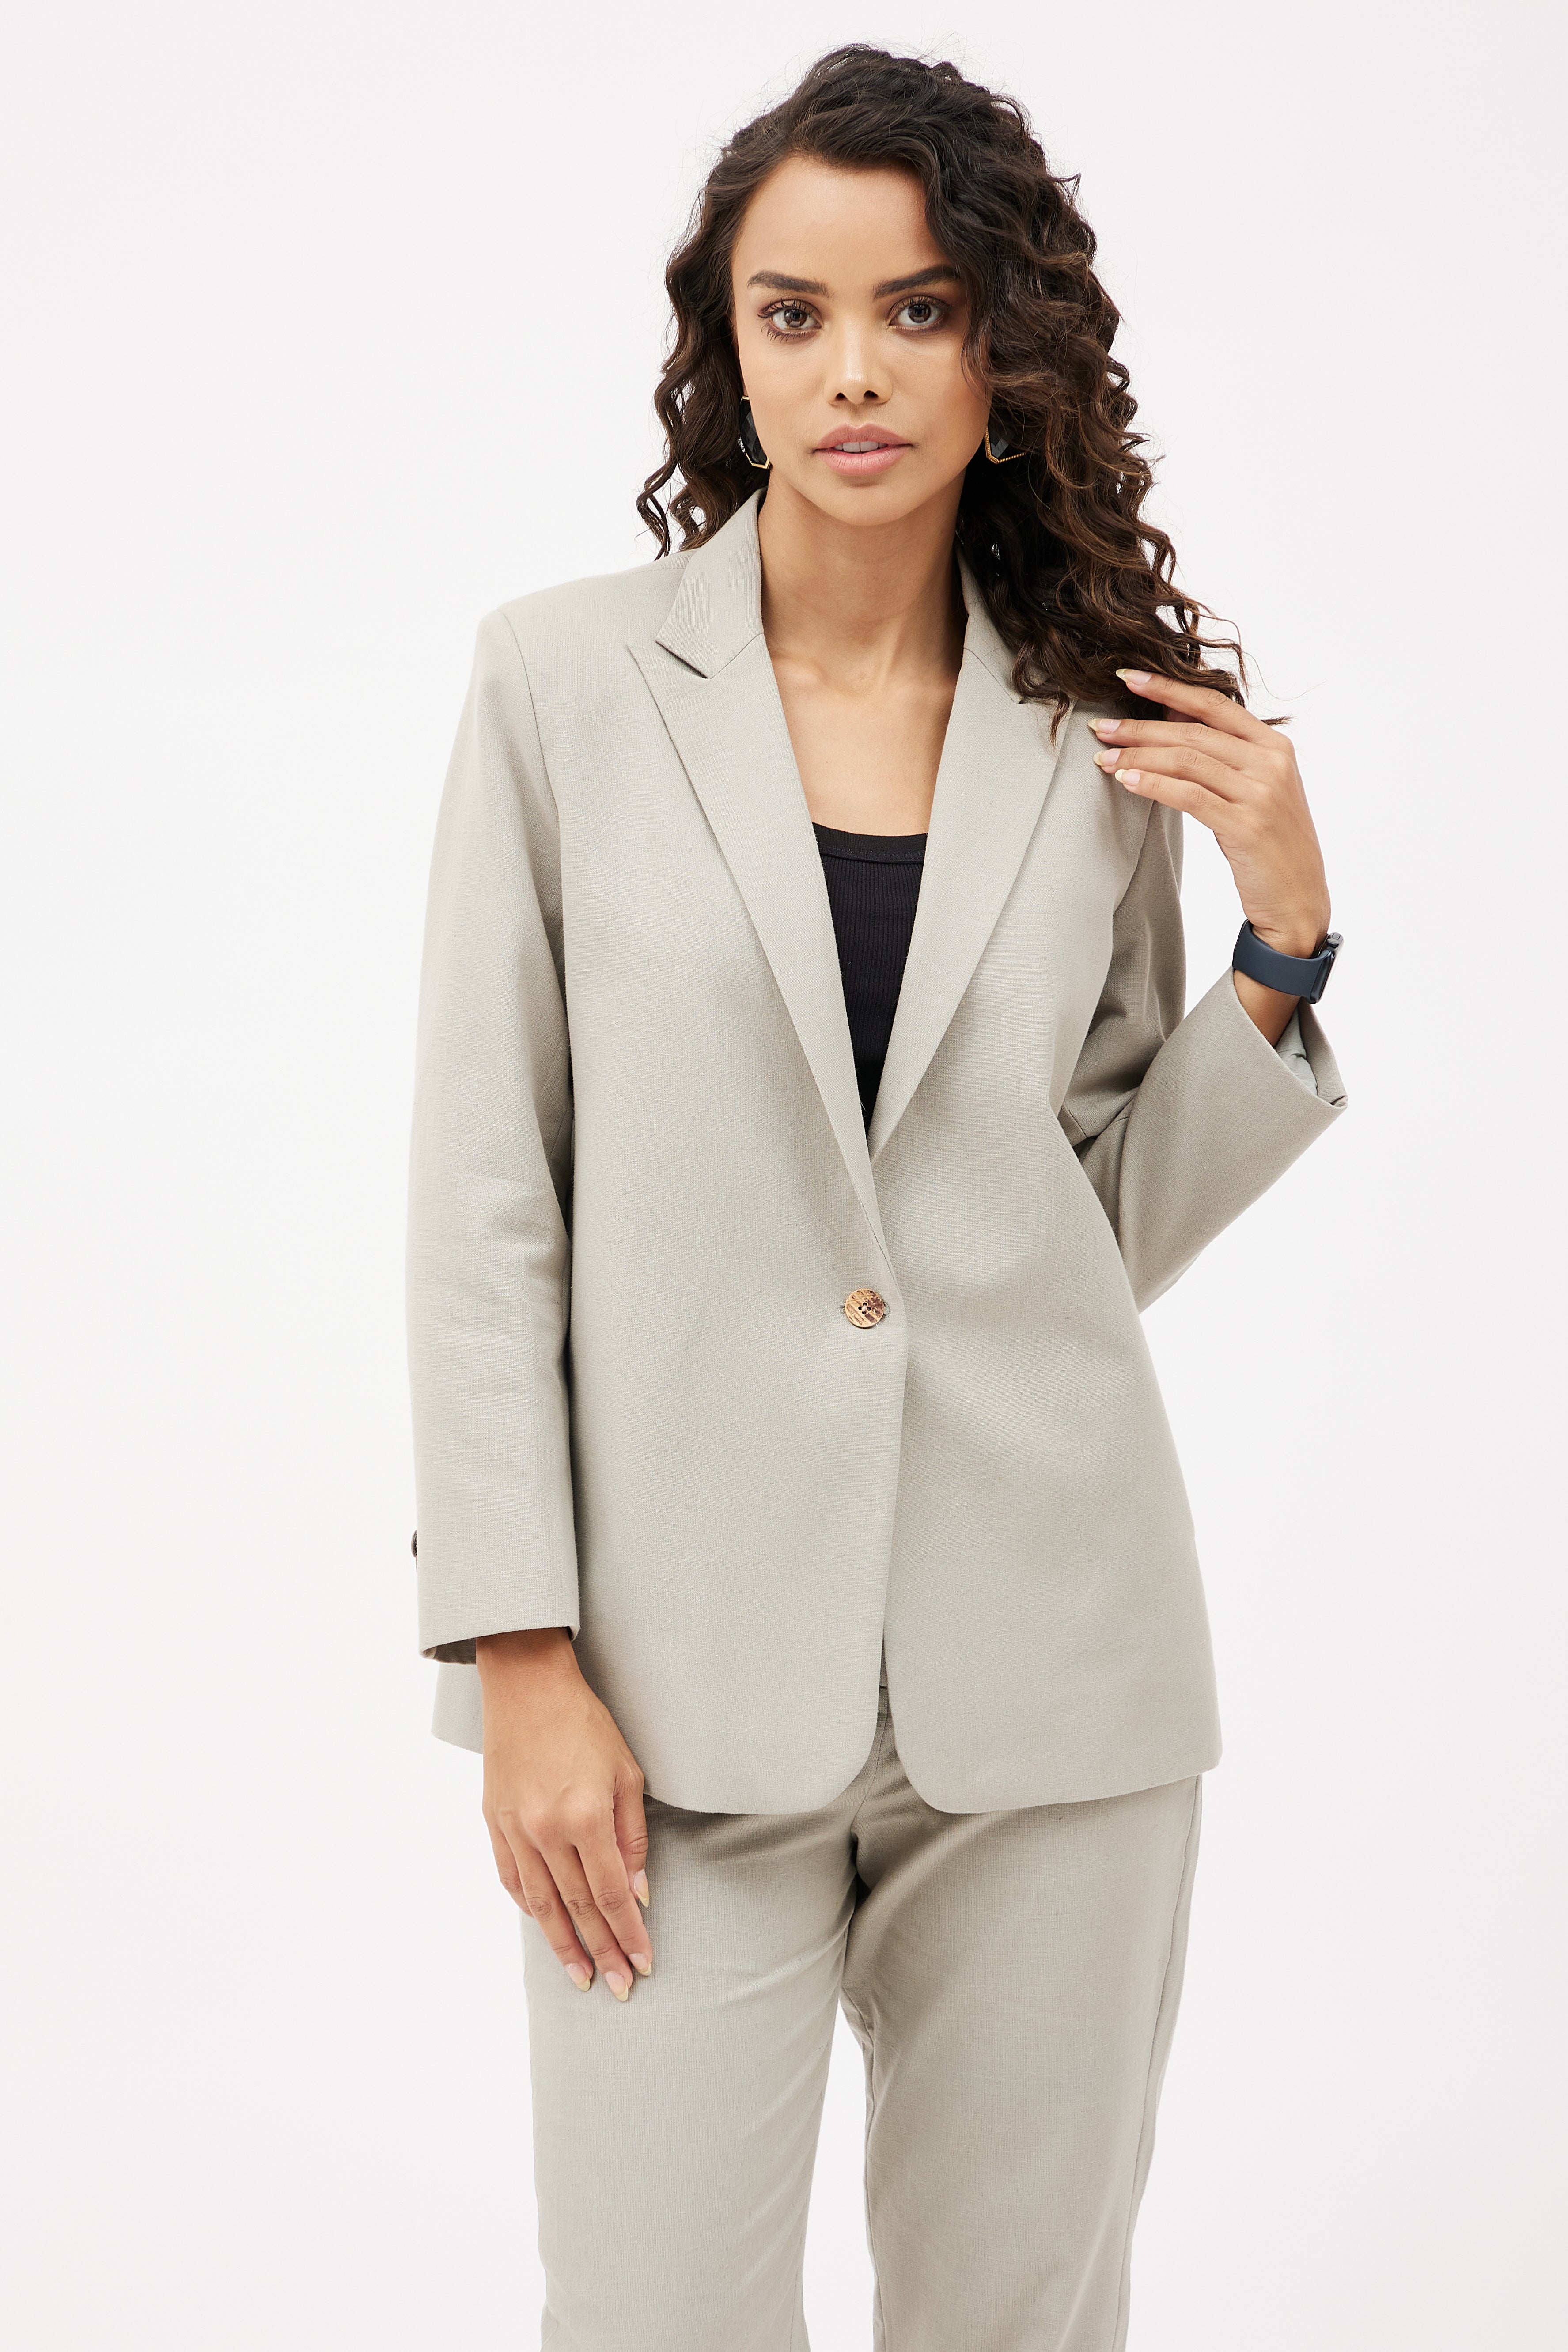 Huidianyin Loose Women Trousers Suits Formal Casual Business Jacket &  Pencil Pants Ladies Two Pieces Blazer Set Femme Outfits New | Ladies  trouser suits, Trousers women, Blue blazer women